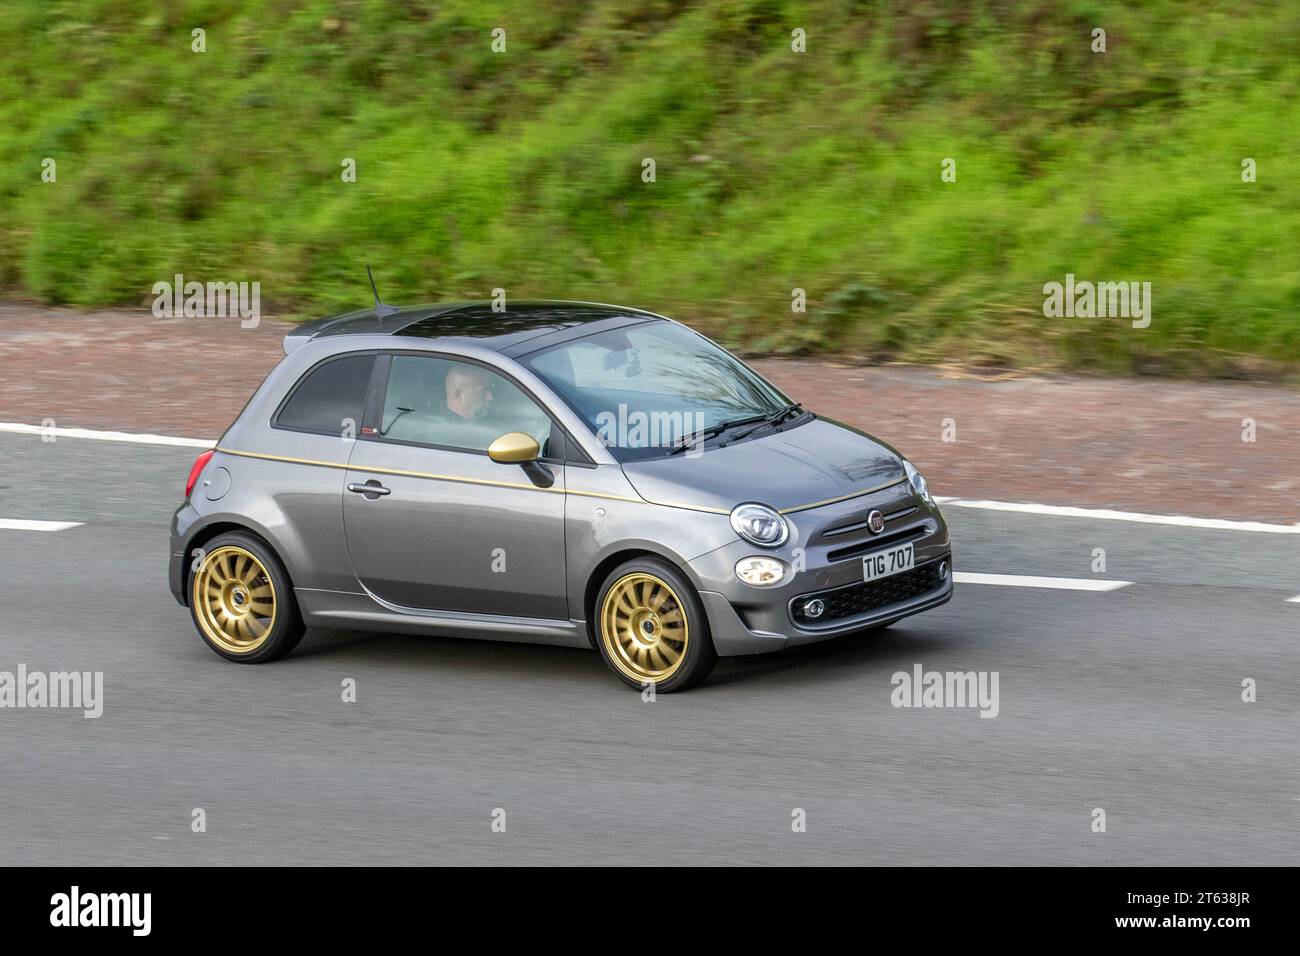 2017 Fiat 500 S Start/Stop Grey Car Hatchback PetroL 1242 cc, 1.2 L 4-cylinder with Gold wheels; travelling at speed on the M6 motorway in Greater Manchester, UK Stock Photo